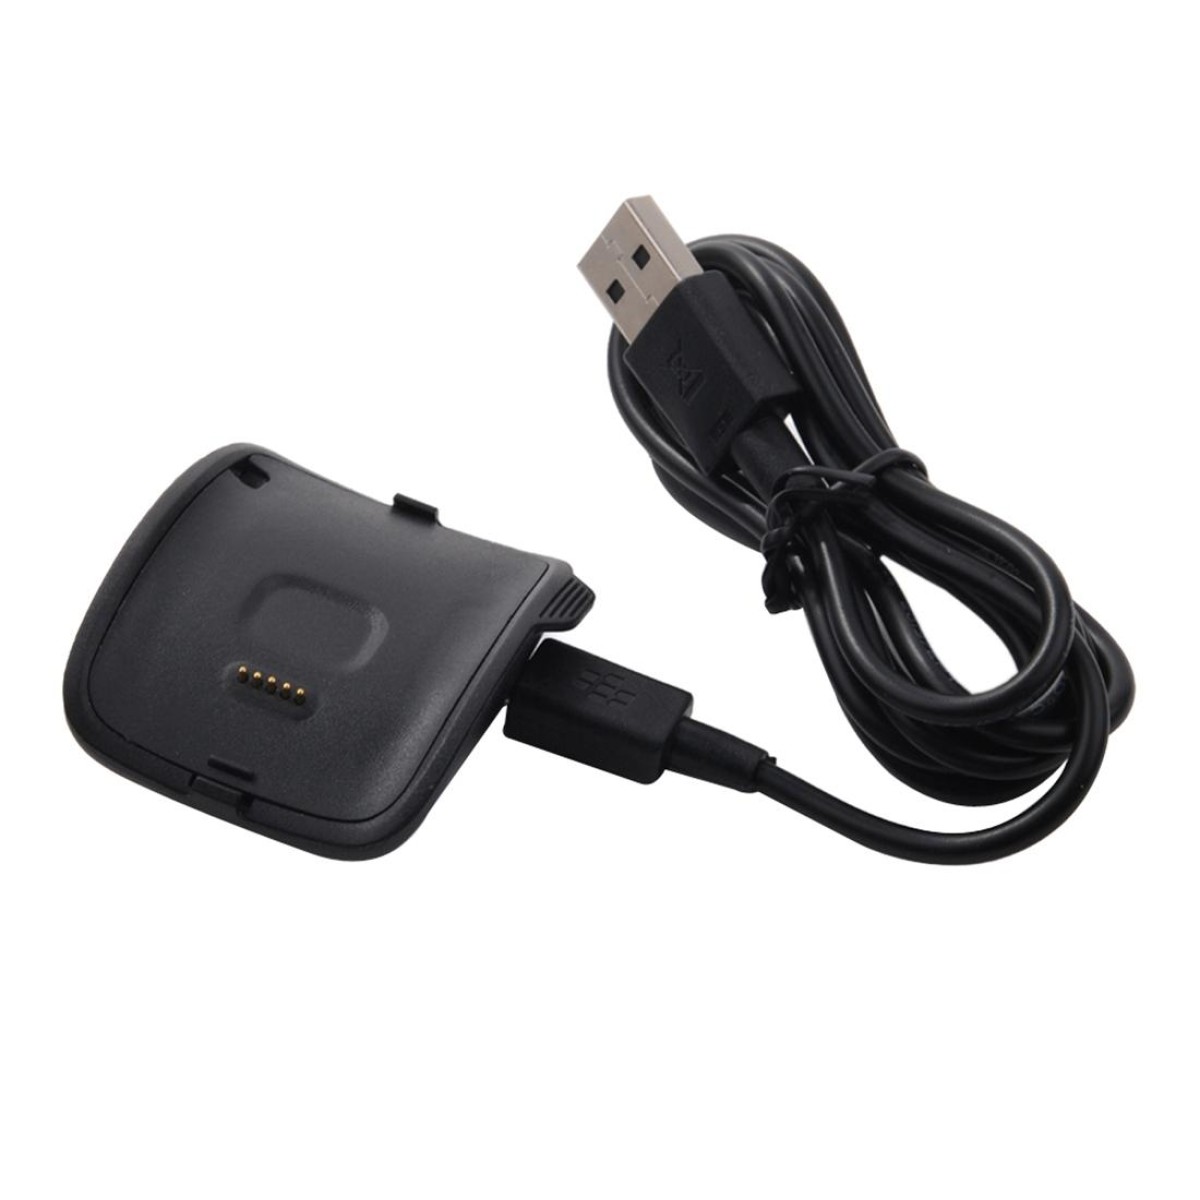 Charging Cradle Dock Charger with USB cable for Samsung Gear S Smart Watch SM-R750